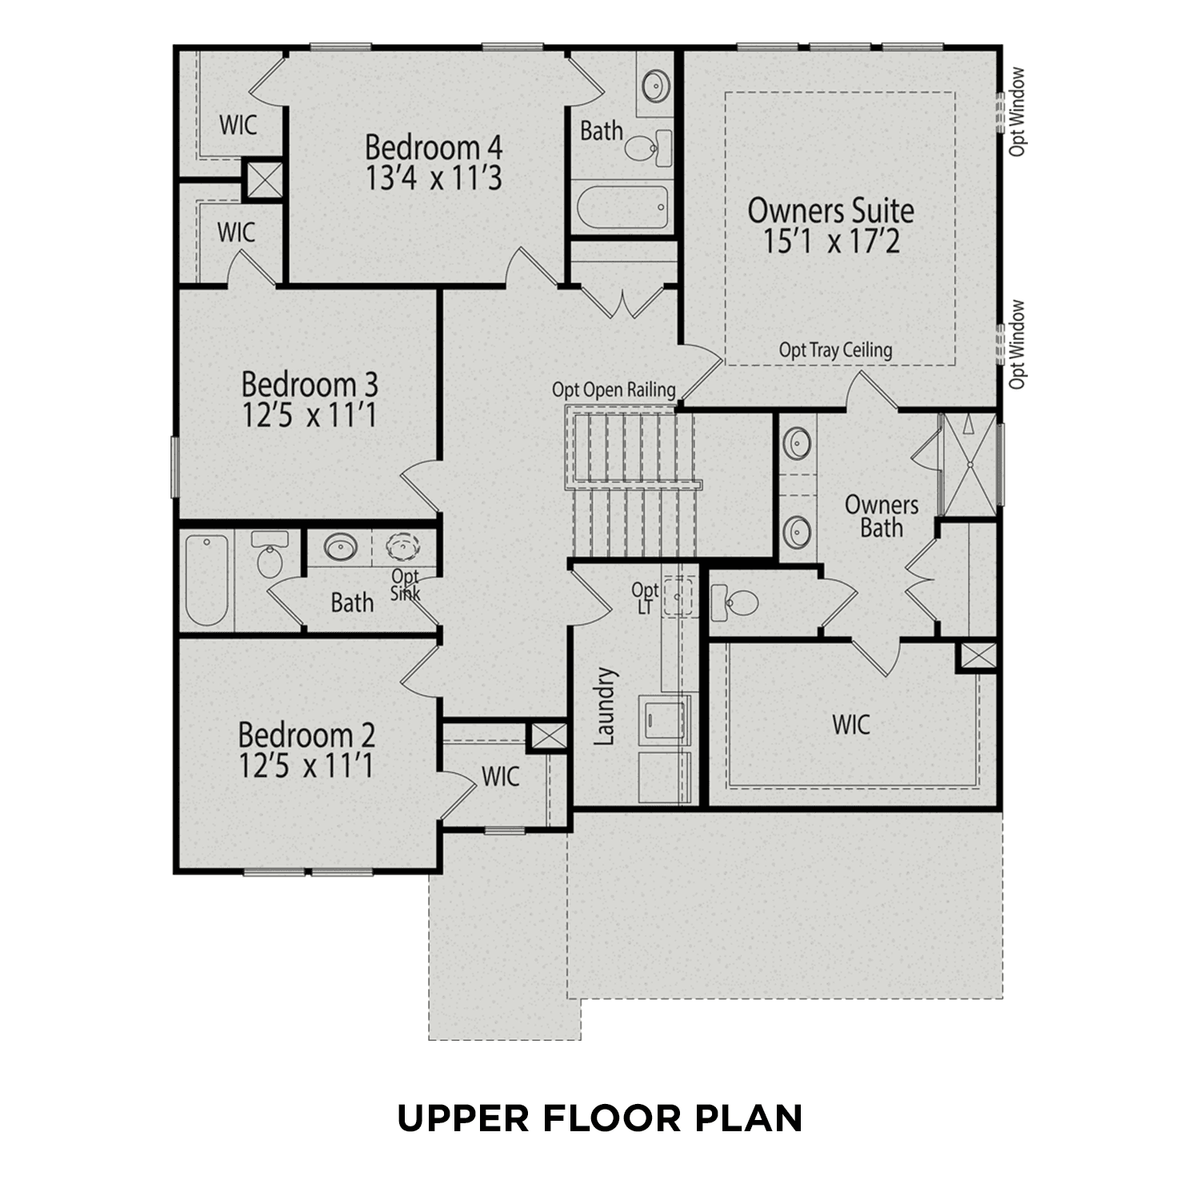 2 - The Hickory D floor plan layout for 157 Looping Court in Davidson Homes' Tobacco Road community.